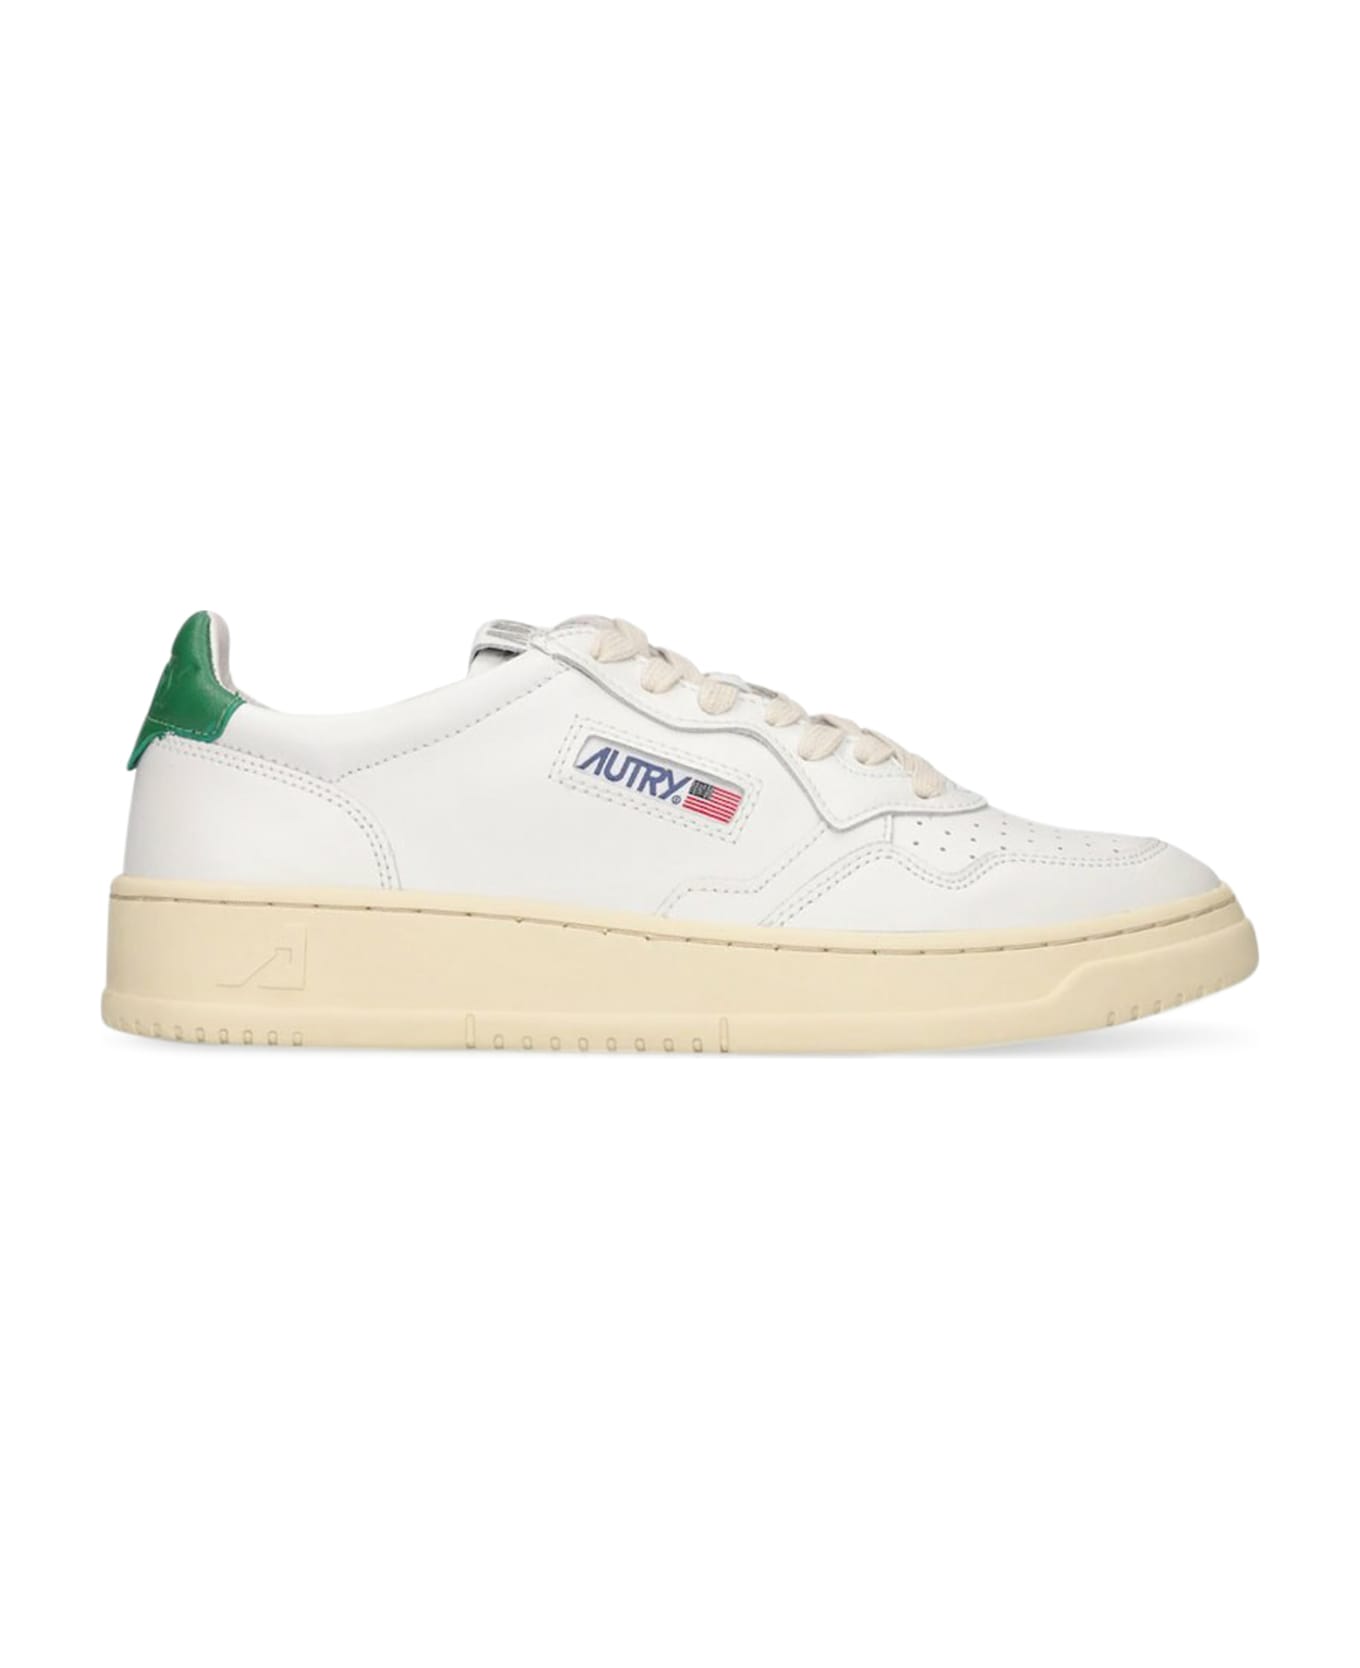 Autry Sneakers - White Green